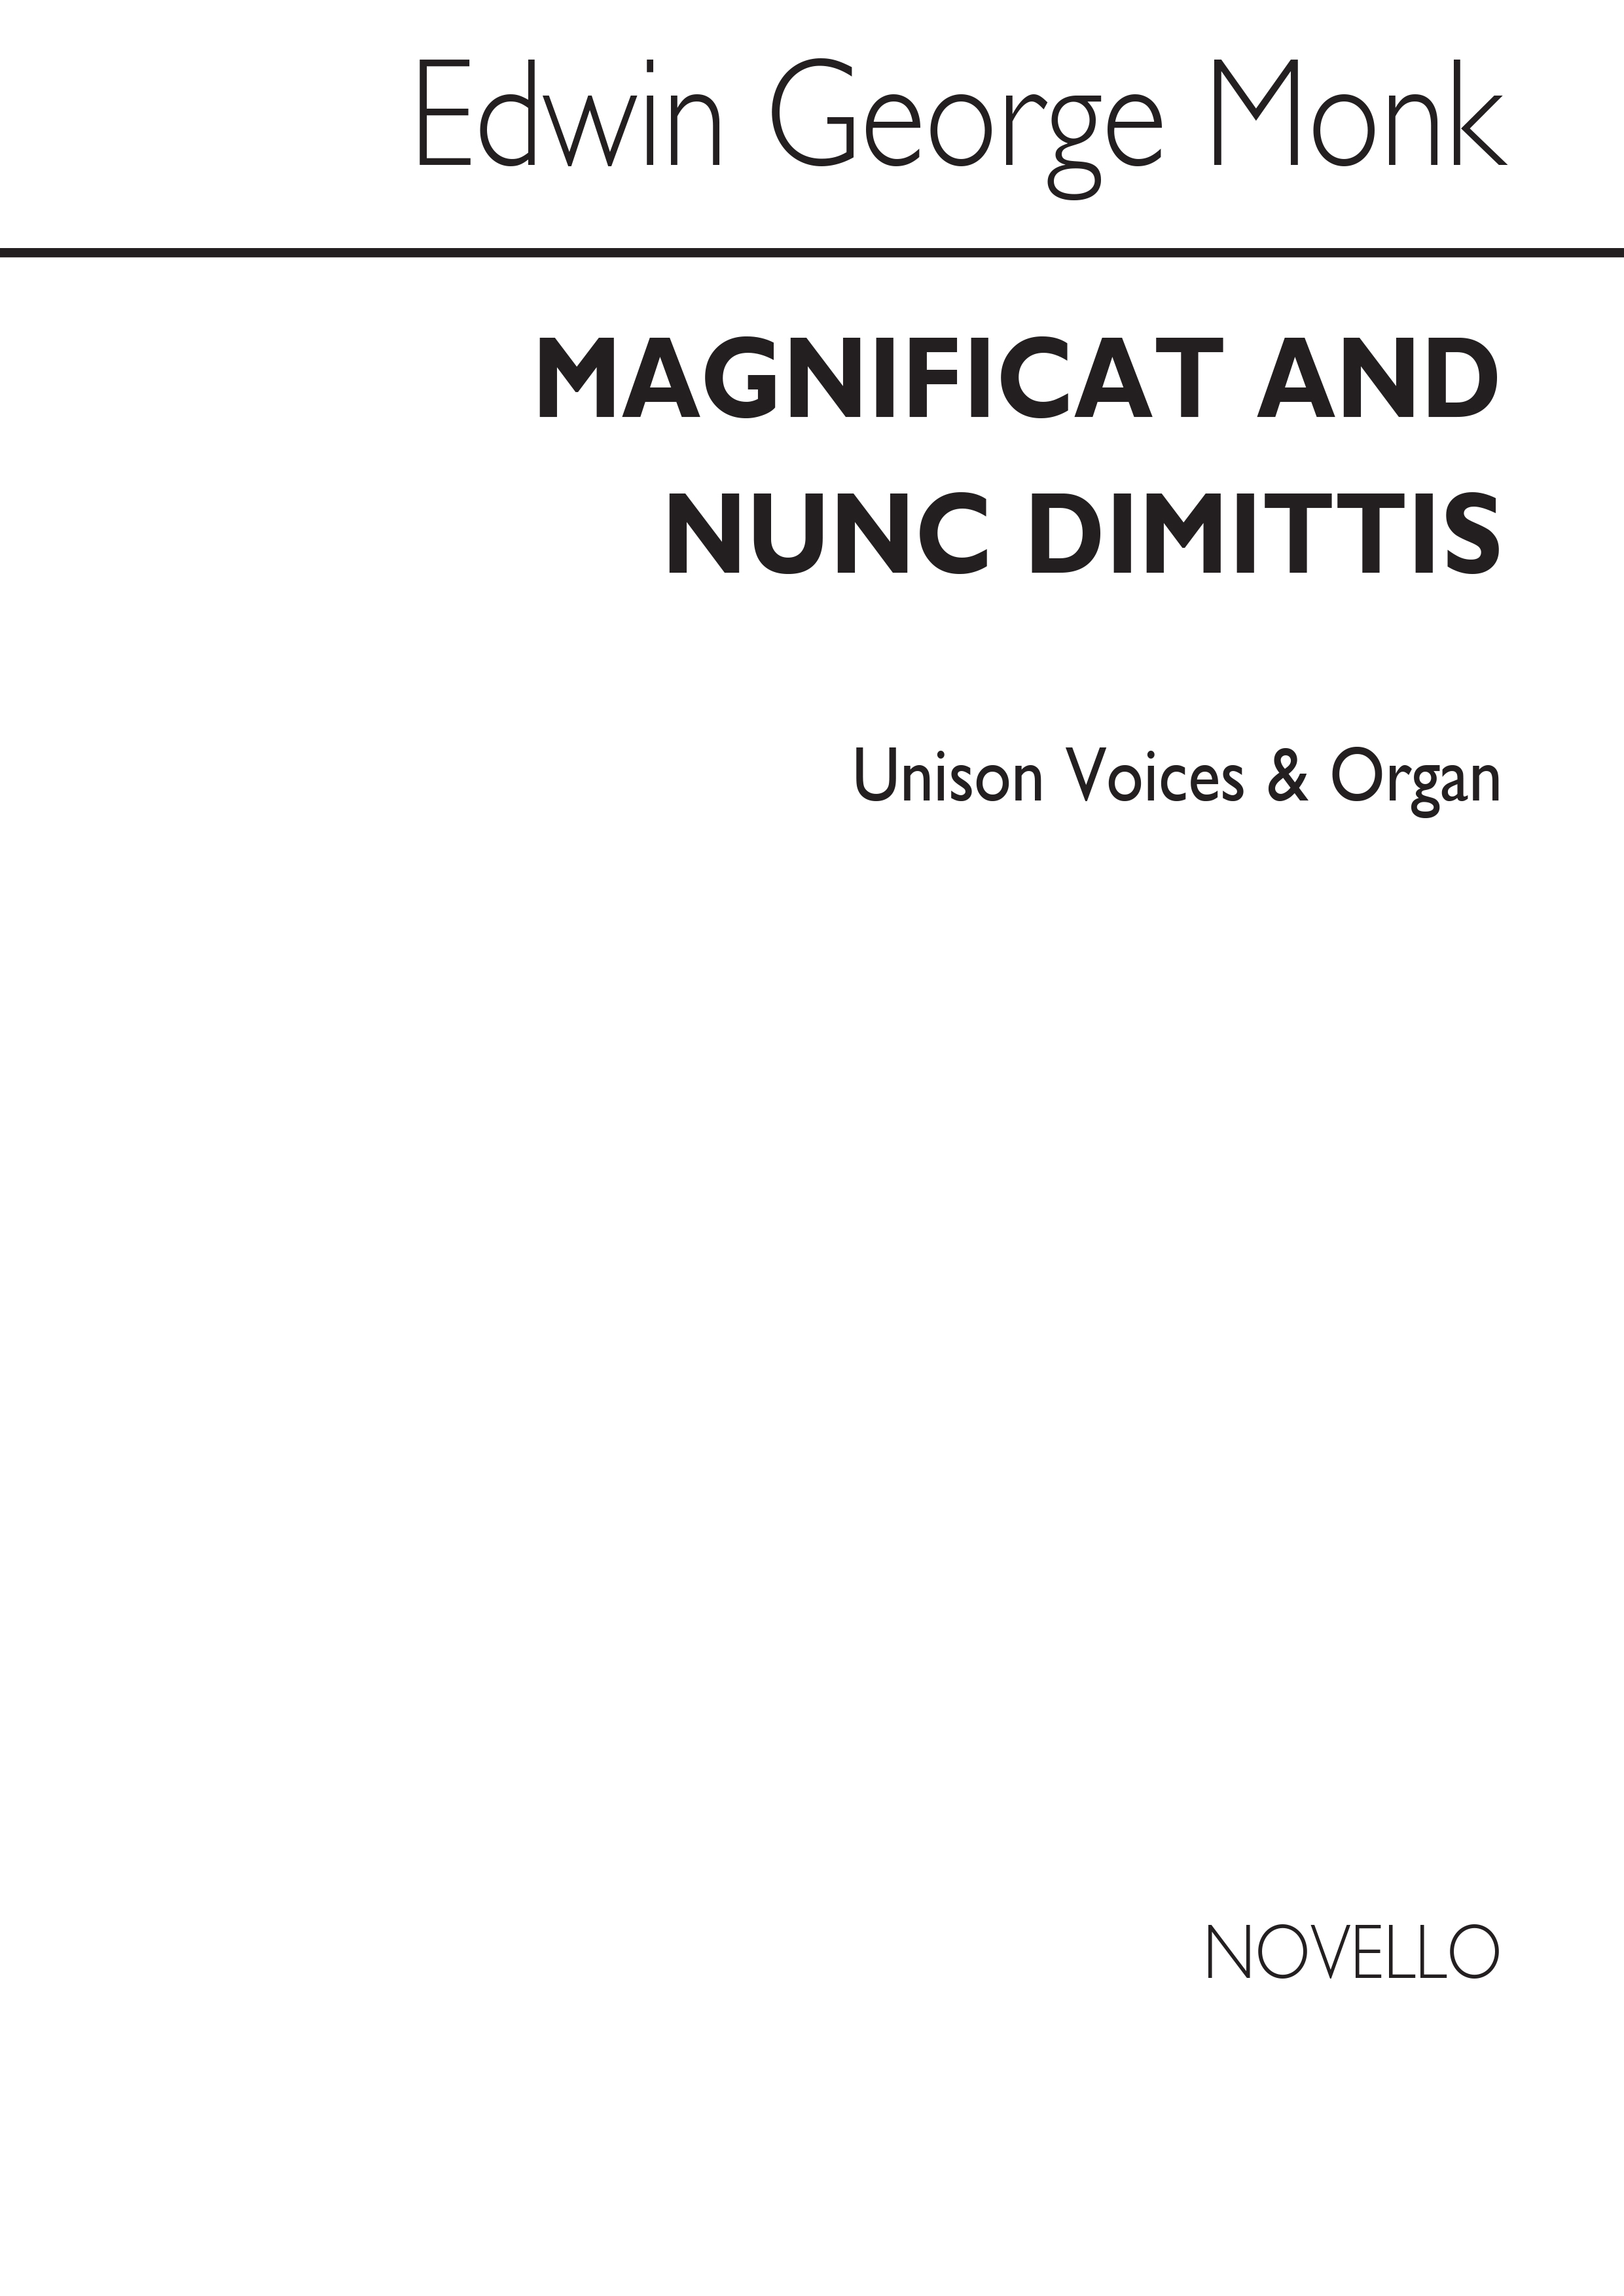 Edwin George Monk: Magnificat And Nunc Dimittis In A Unison/Organ